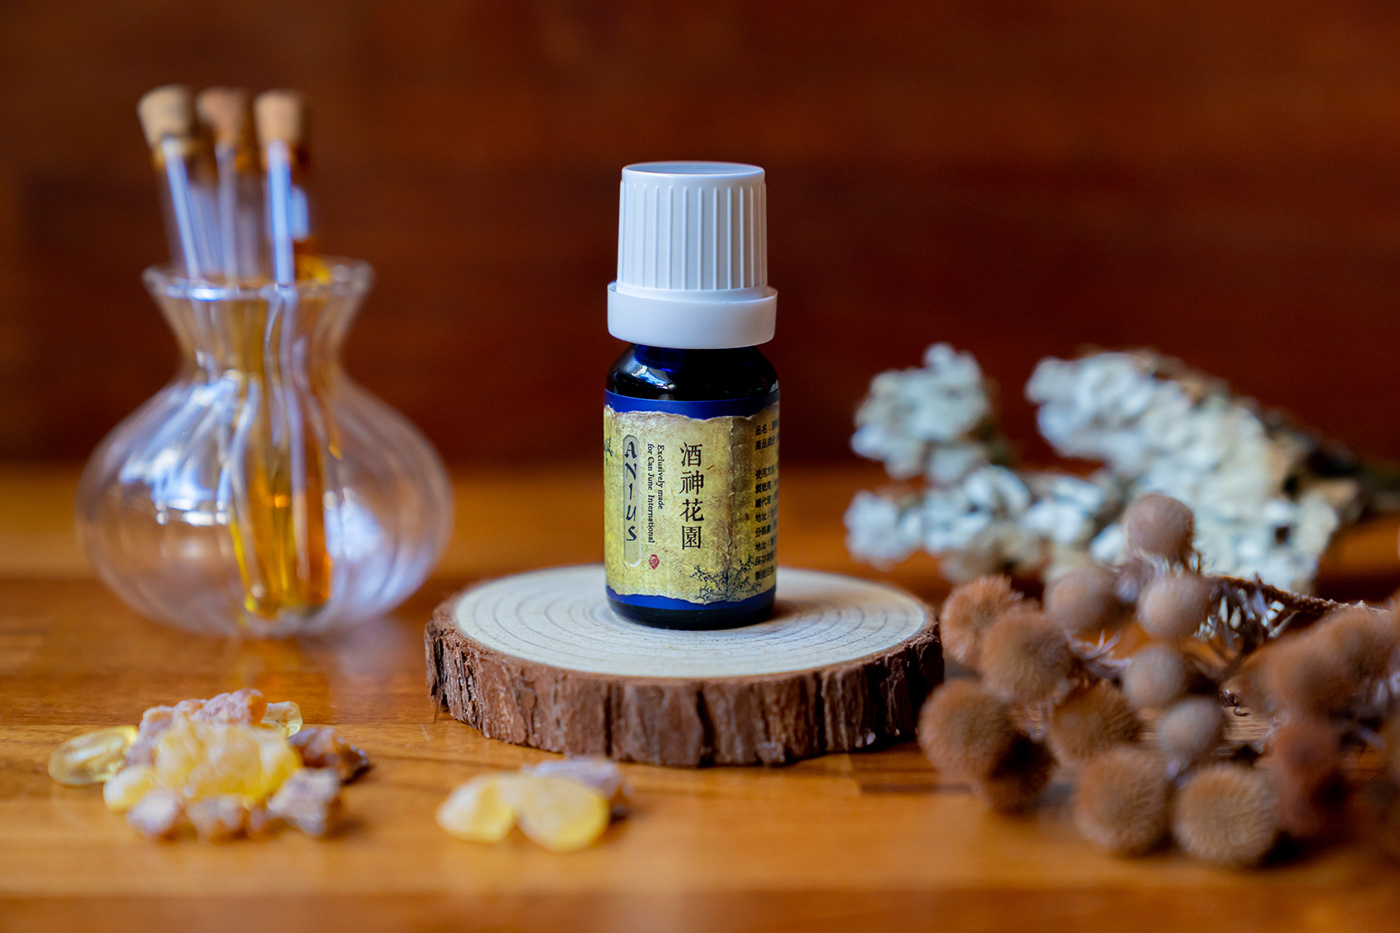 commercial Commercial Photography essential oil oil Photography 